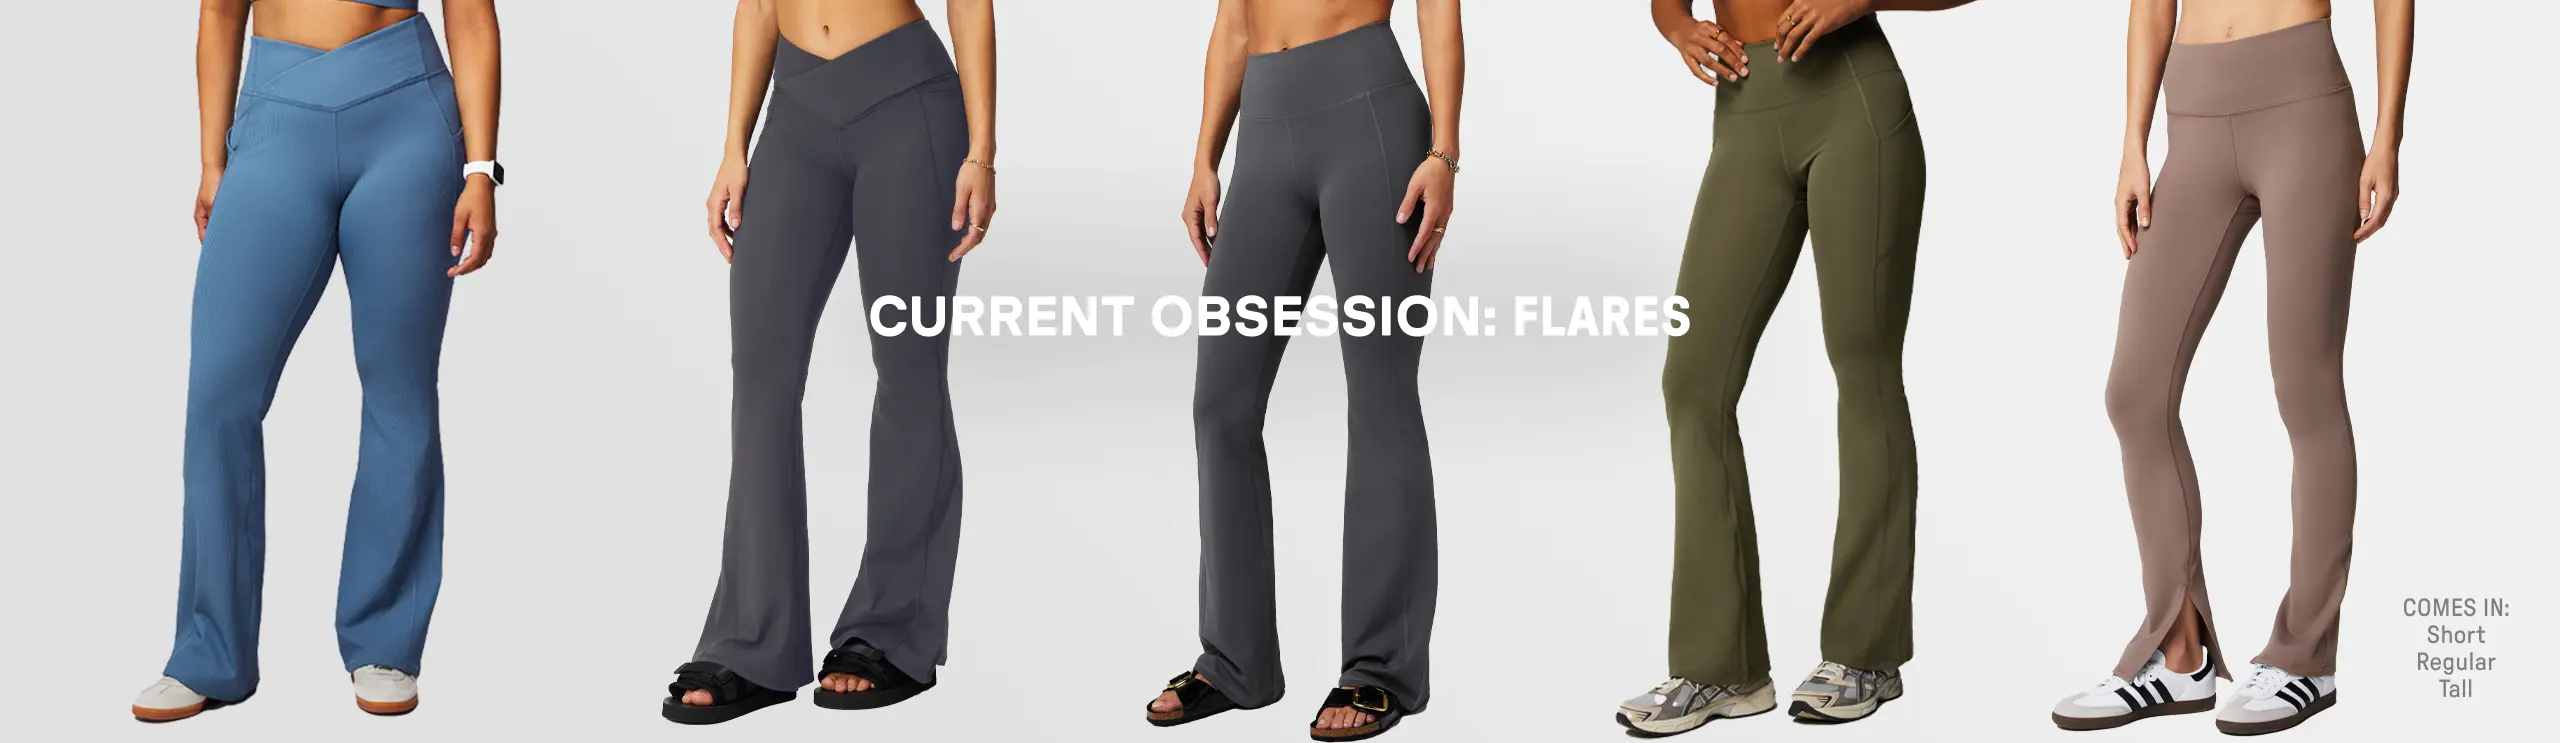 Current obsession flares click now to shop